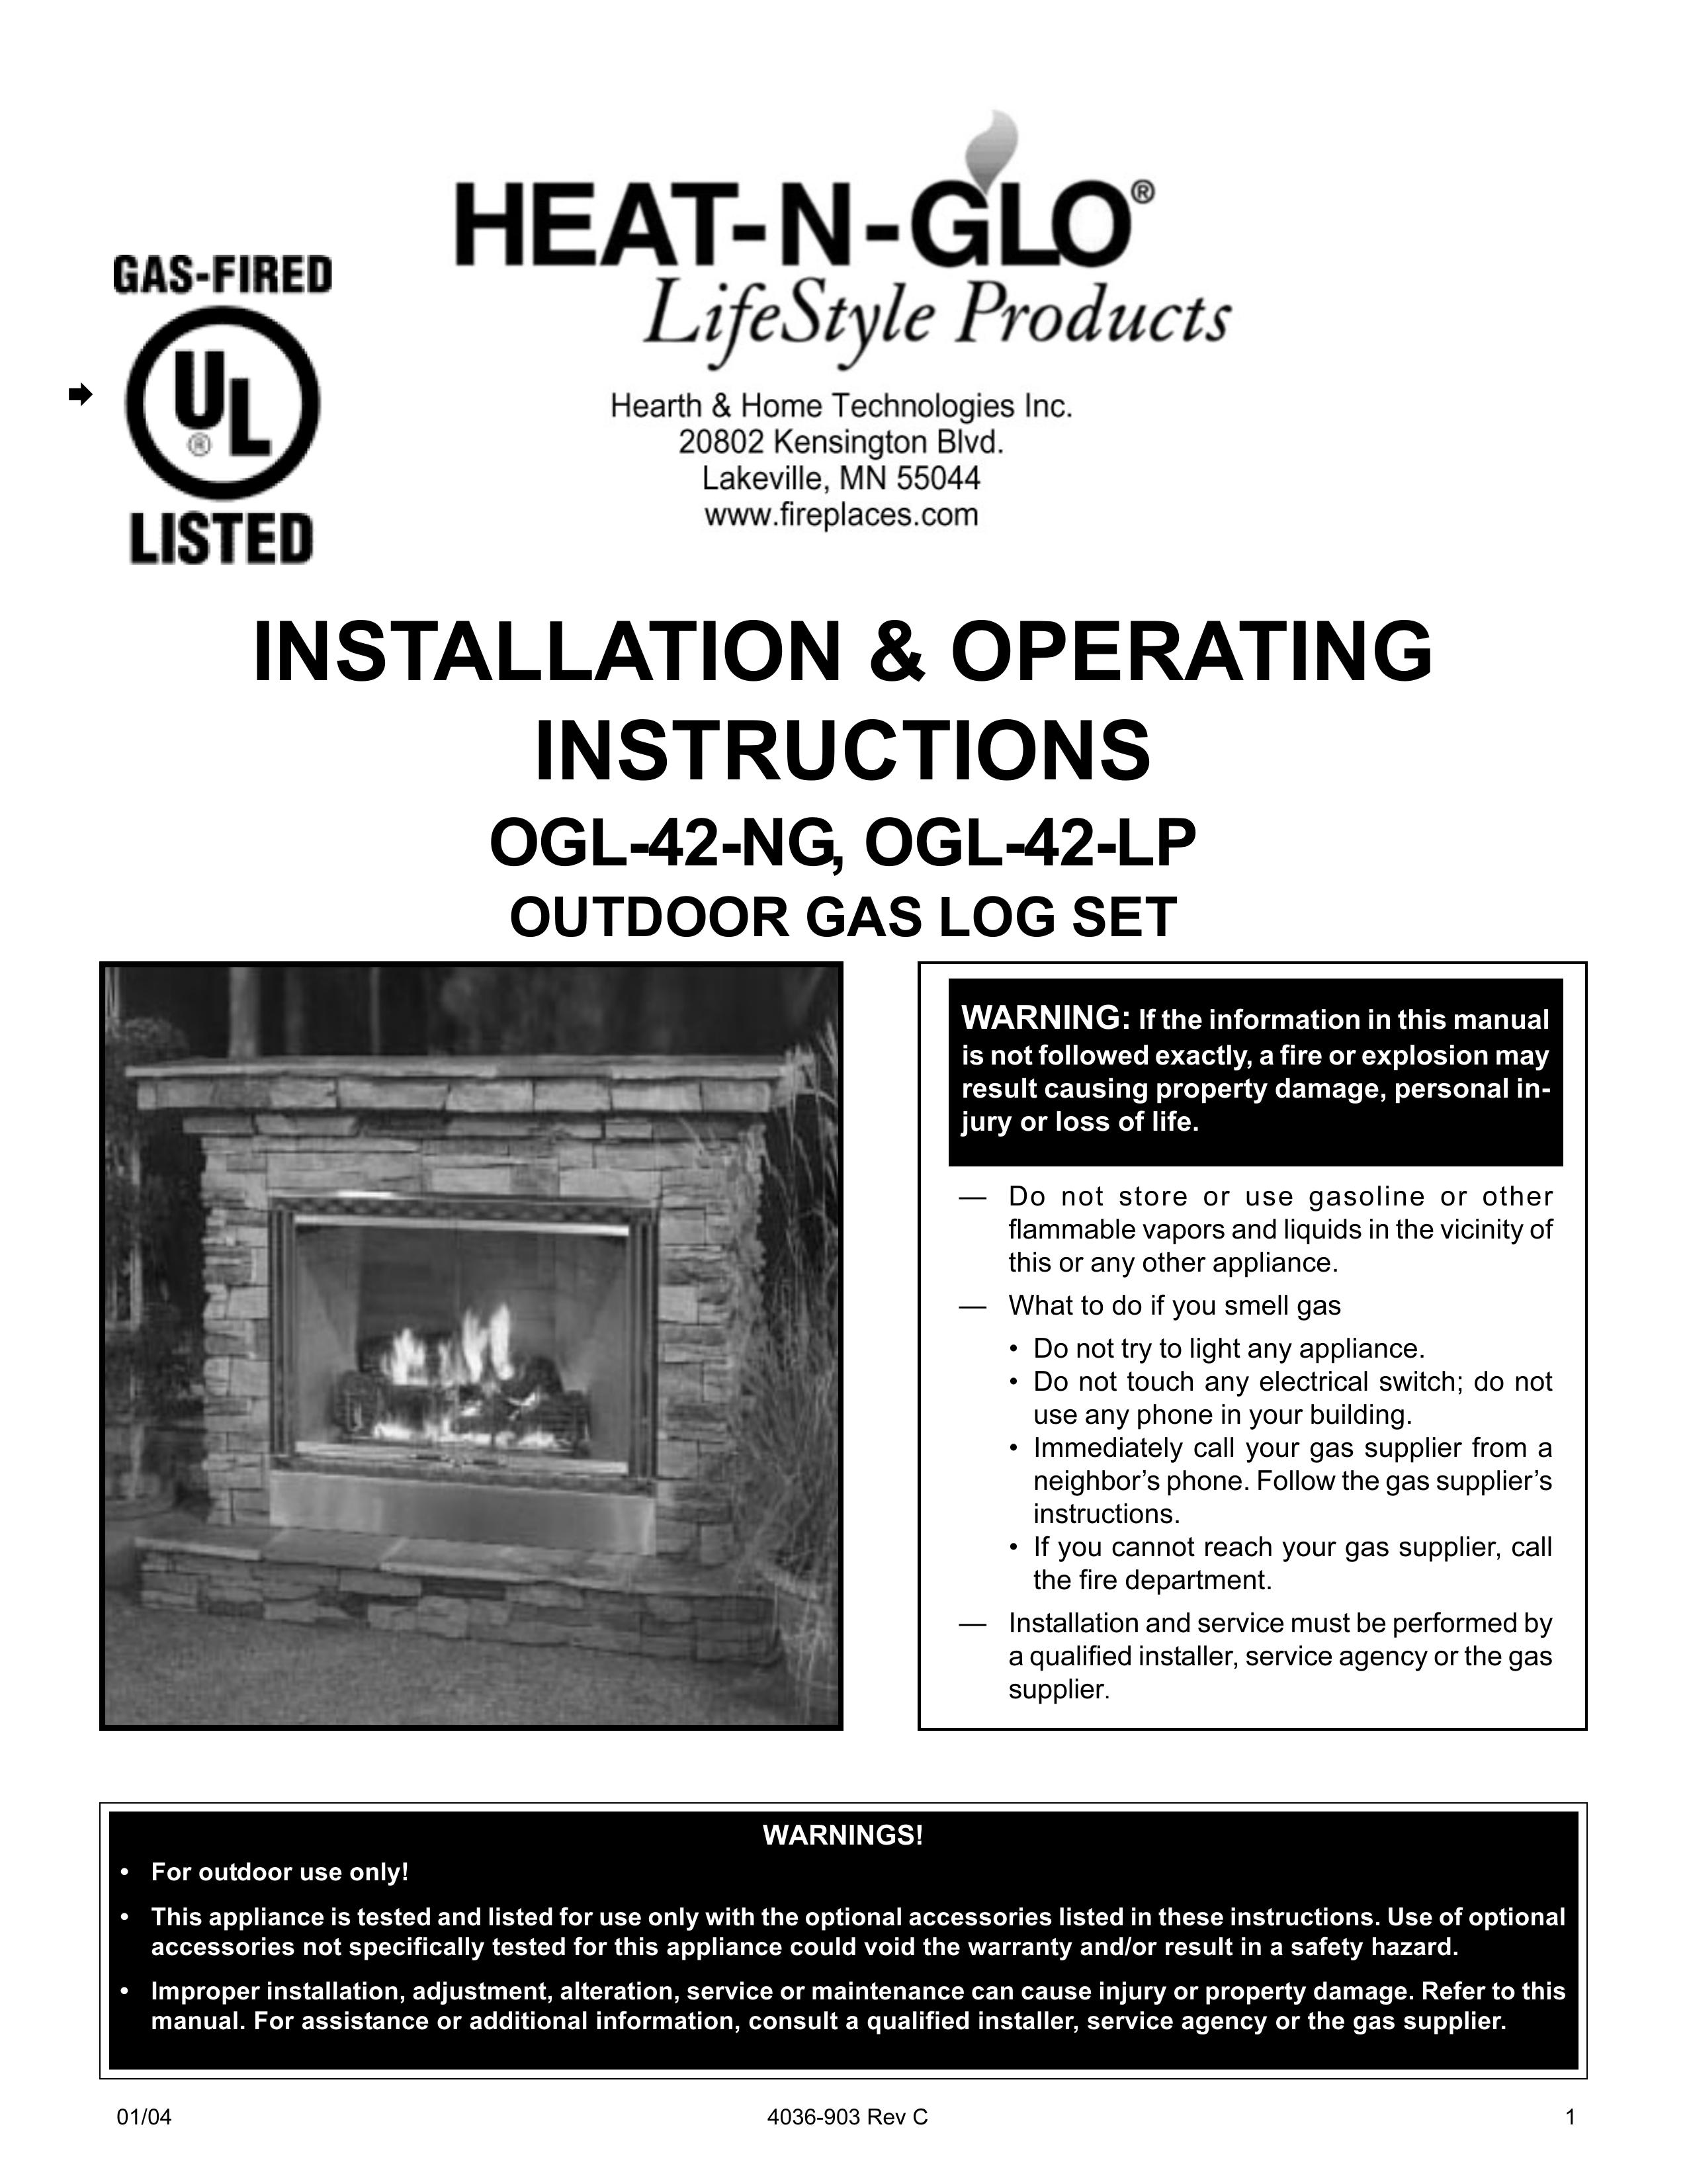 Heat & Glo LifeStyle OGL-42-NG Outdoor Fireplace User Manual